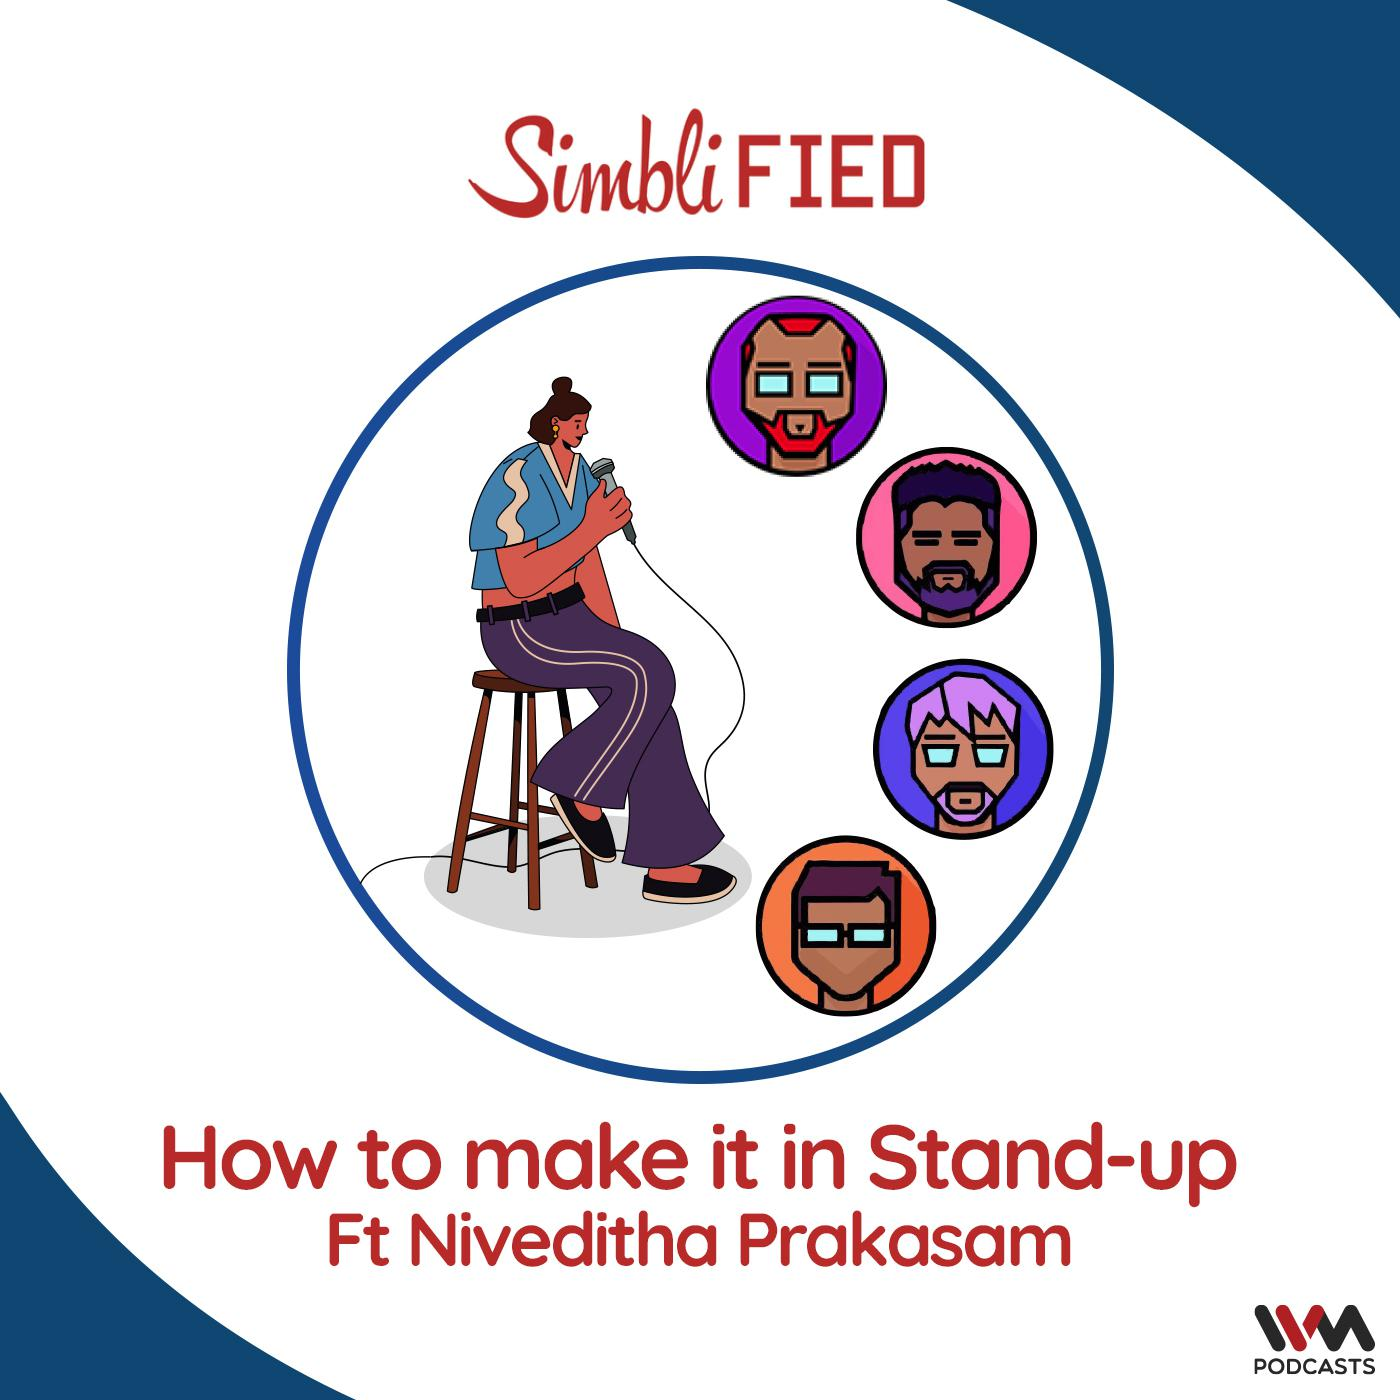 How to make it in Stand-up ft Niveditha Prakasam